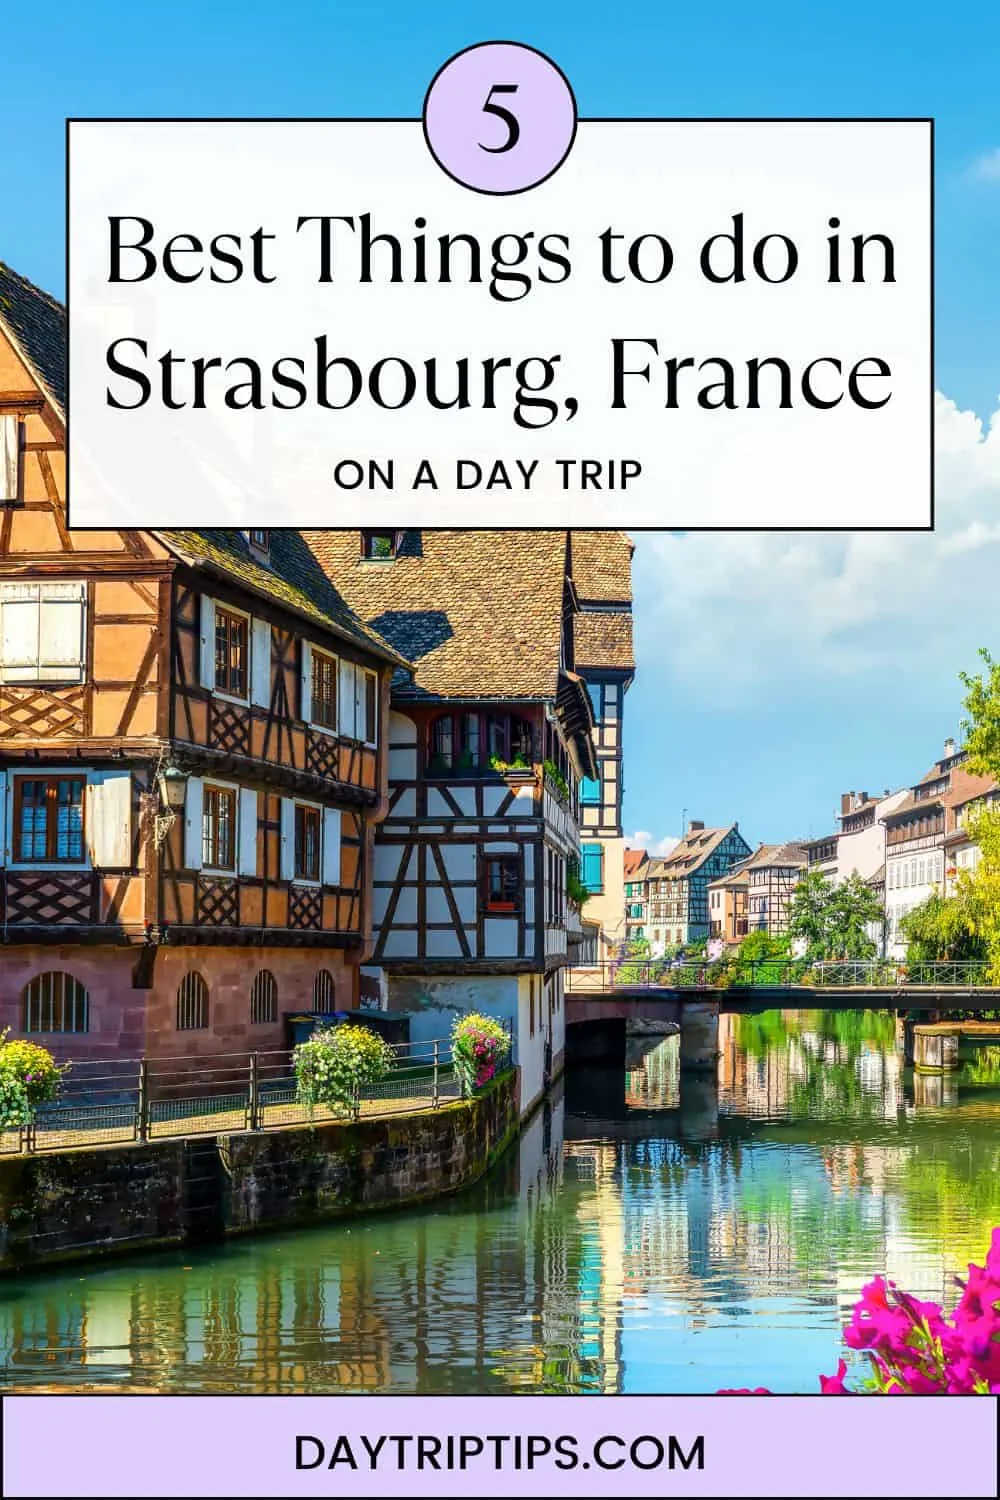 5 BEST Things to do in Strasbourg, France